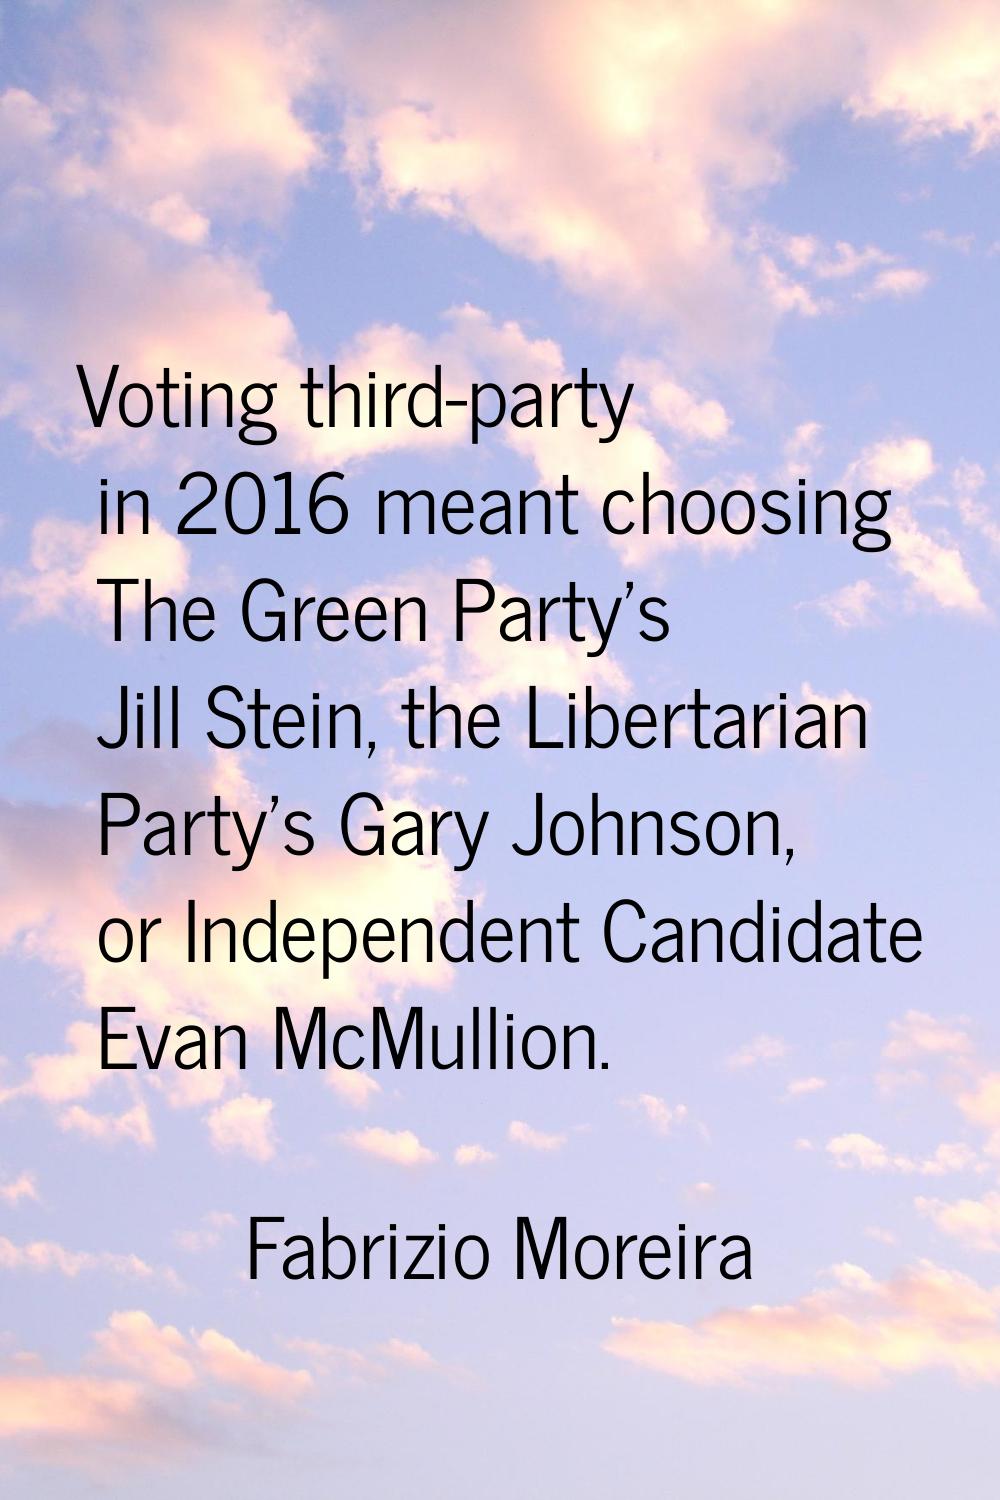 Voting third-party in 2016 meant choosing The Green Party's Jill Stein, the Libertarian Party's Gar